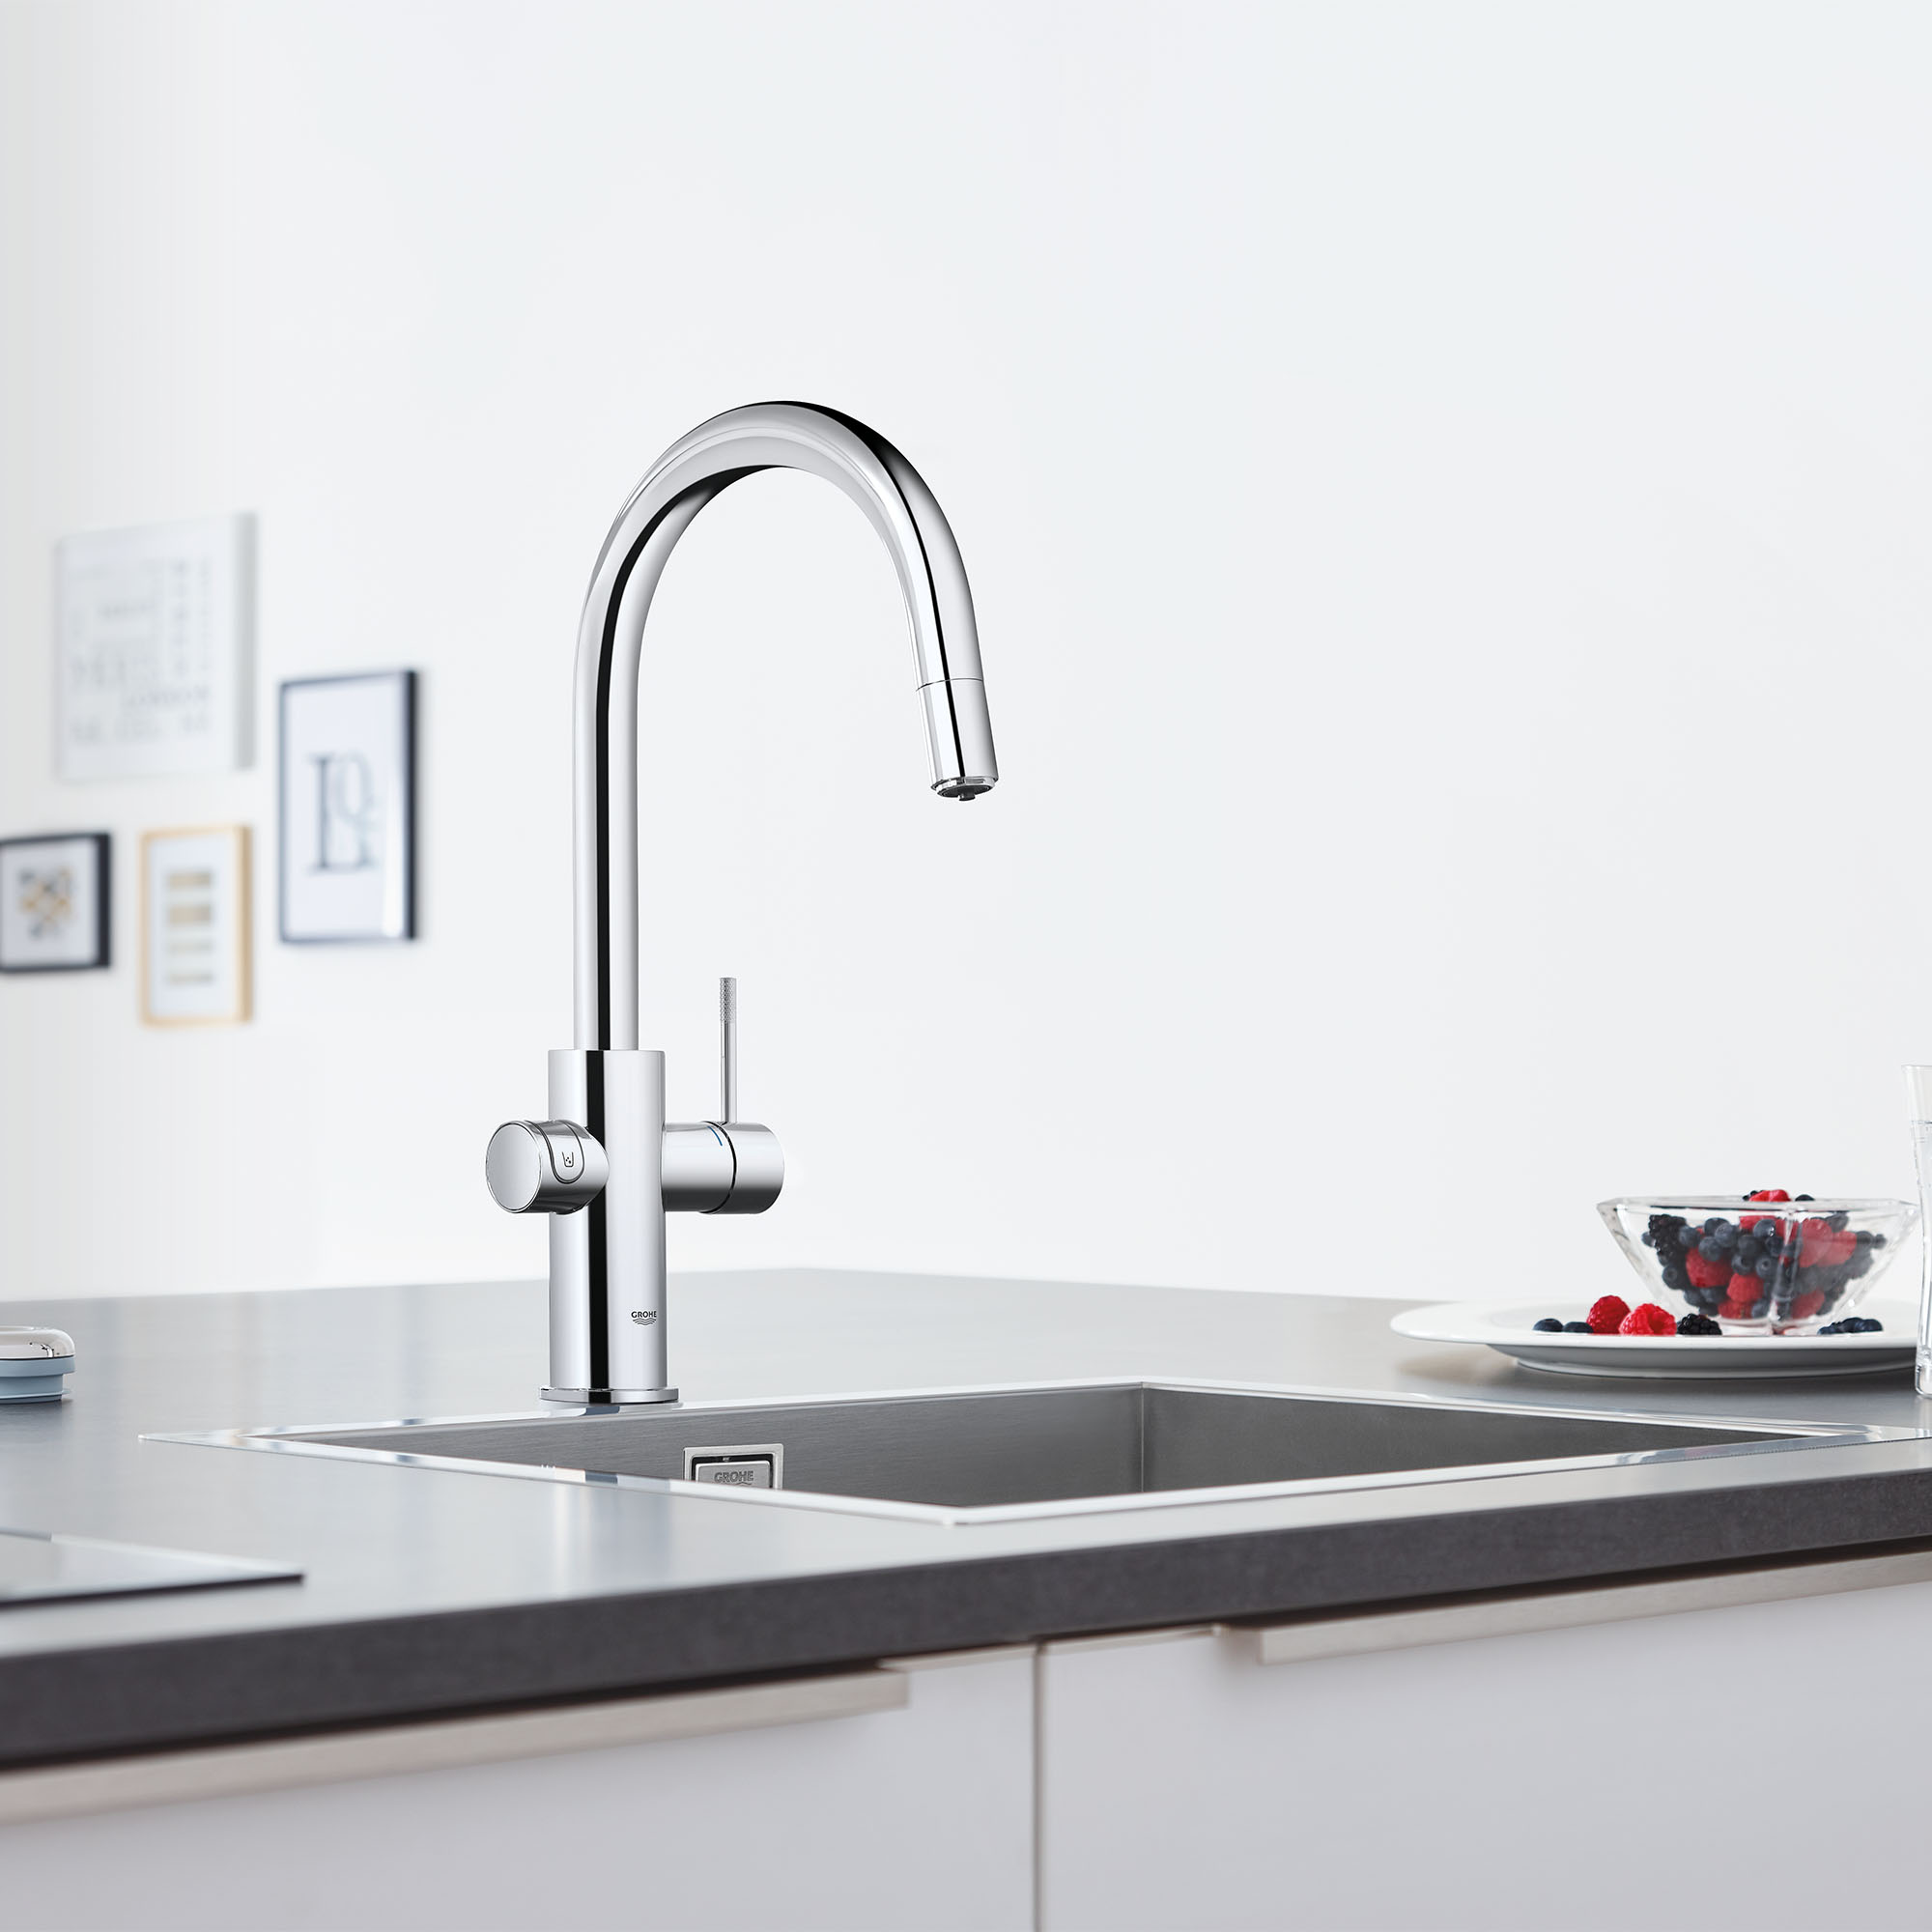 GROHE Blue Single-Handle Pull Down Kitchen Faucet Single Spray 6.6 L/min (1.75 gpm) Chilled & Sparkling Water